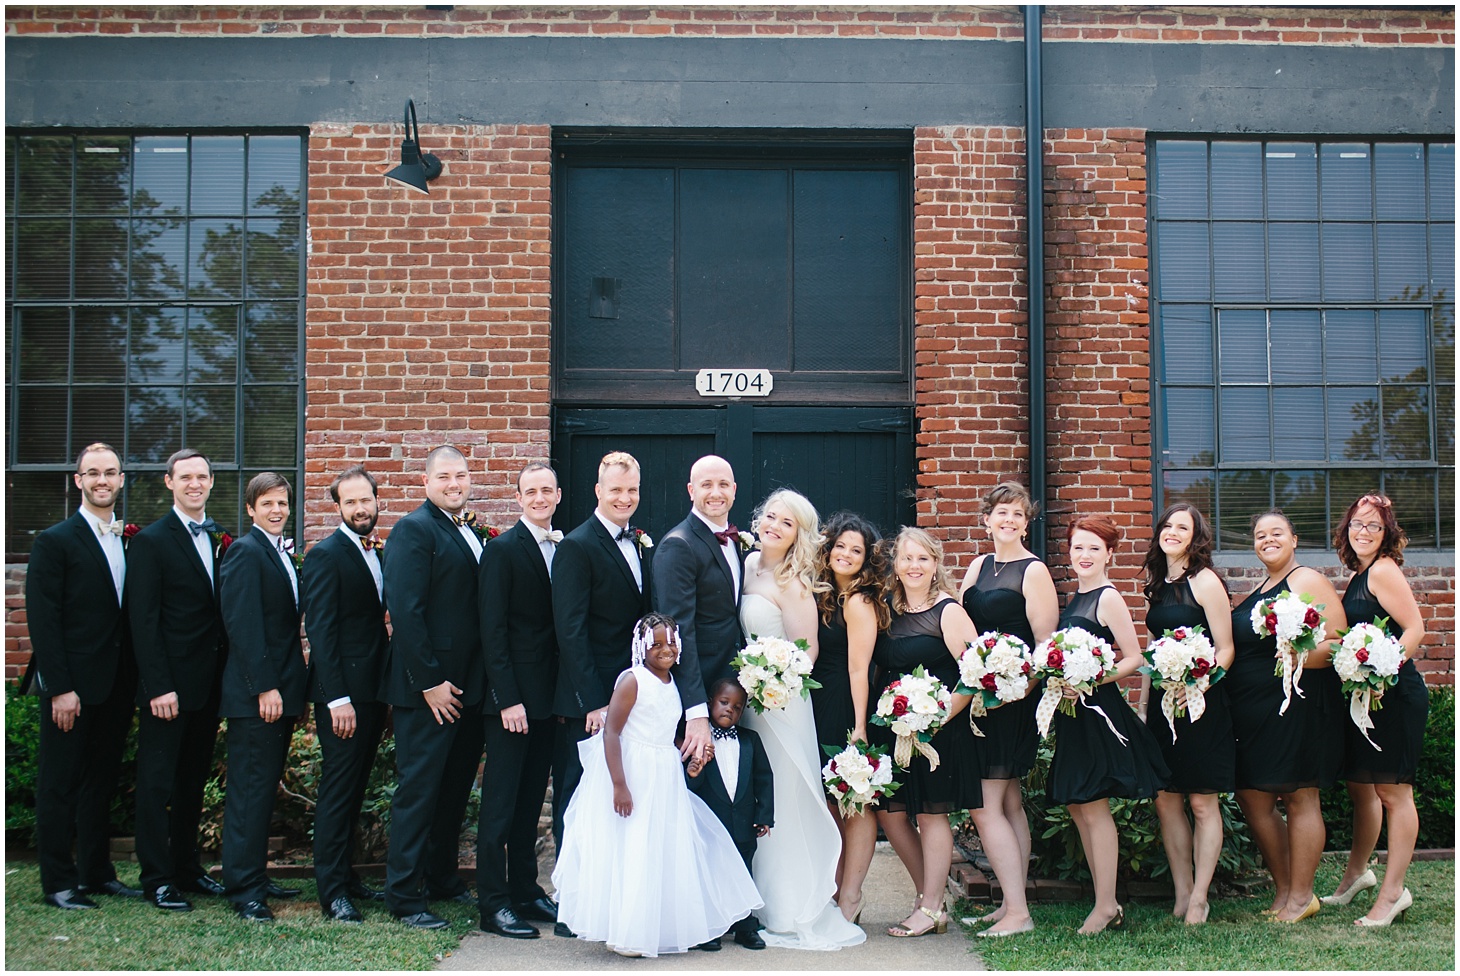 Black & Gold Industrial Wedding at The Old Silk Mill by Sarah Bradshaw Photography